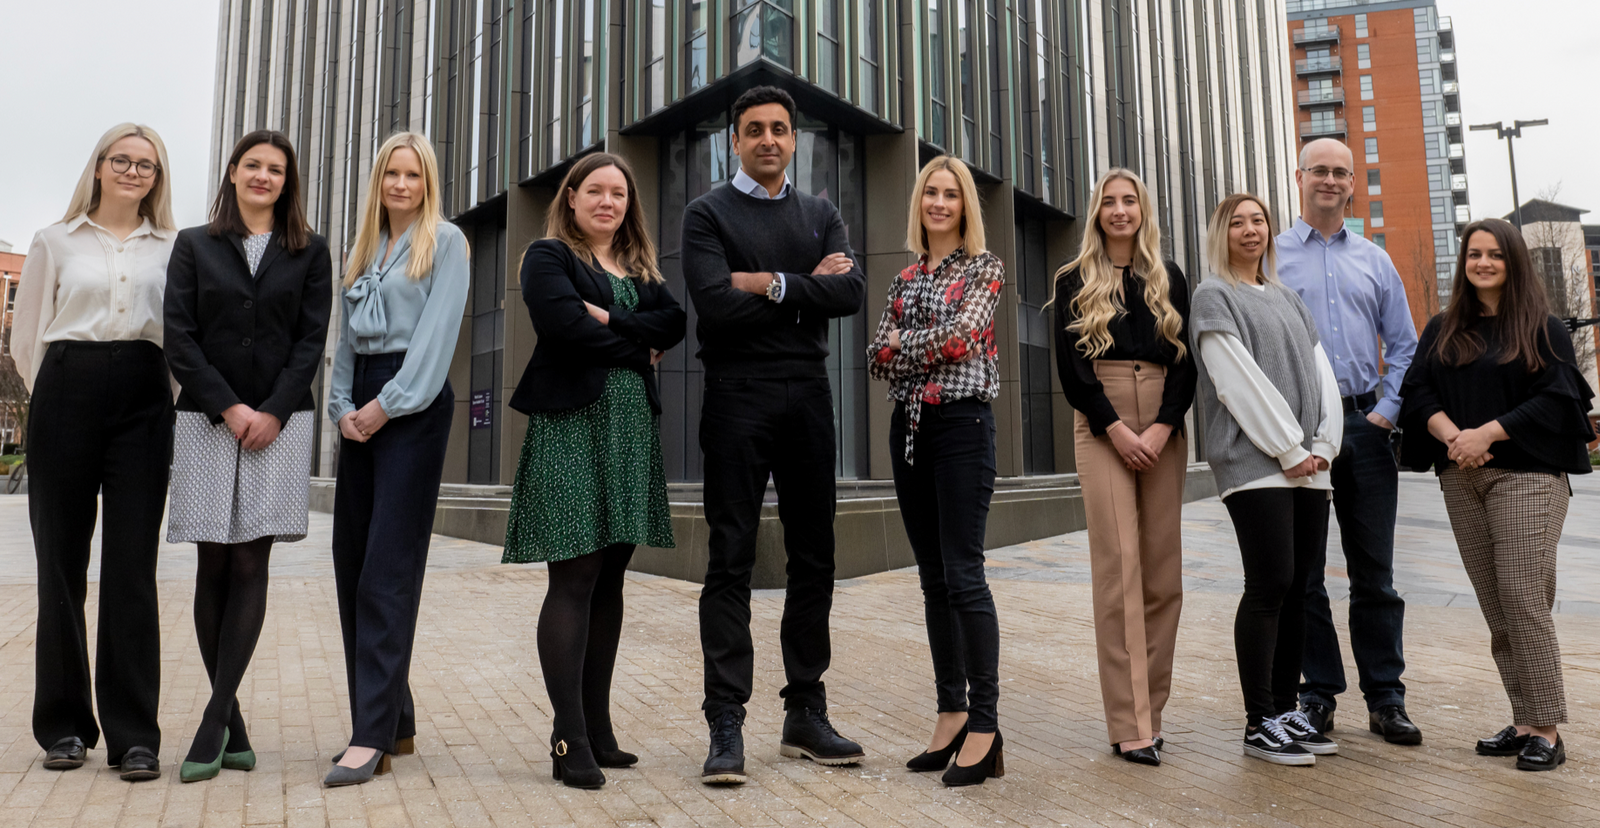 Employment team at Leeds law firm grows by 50%